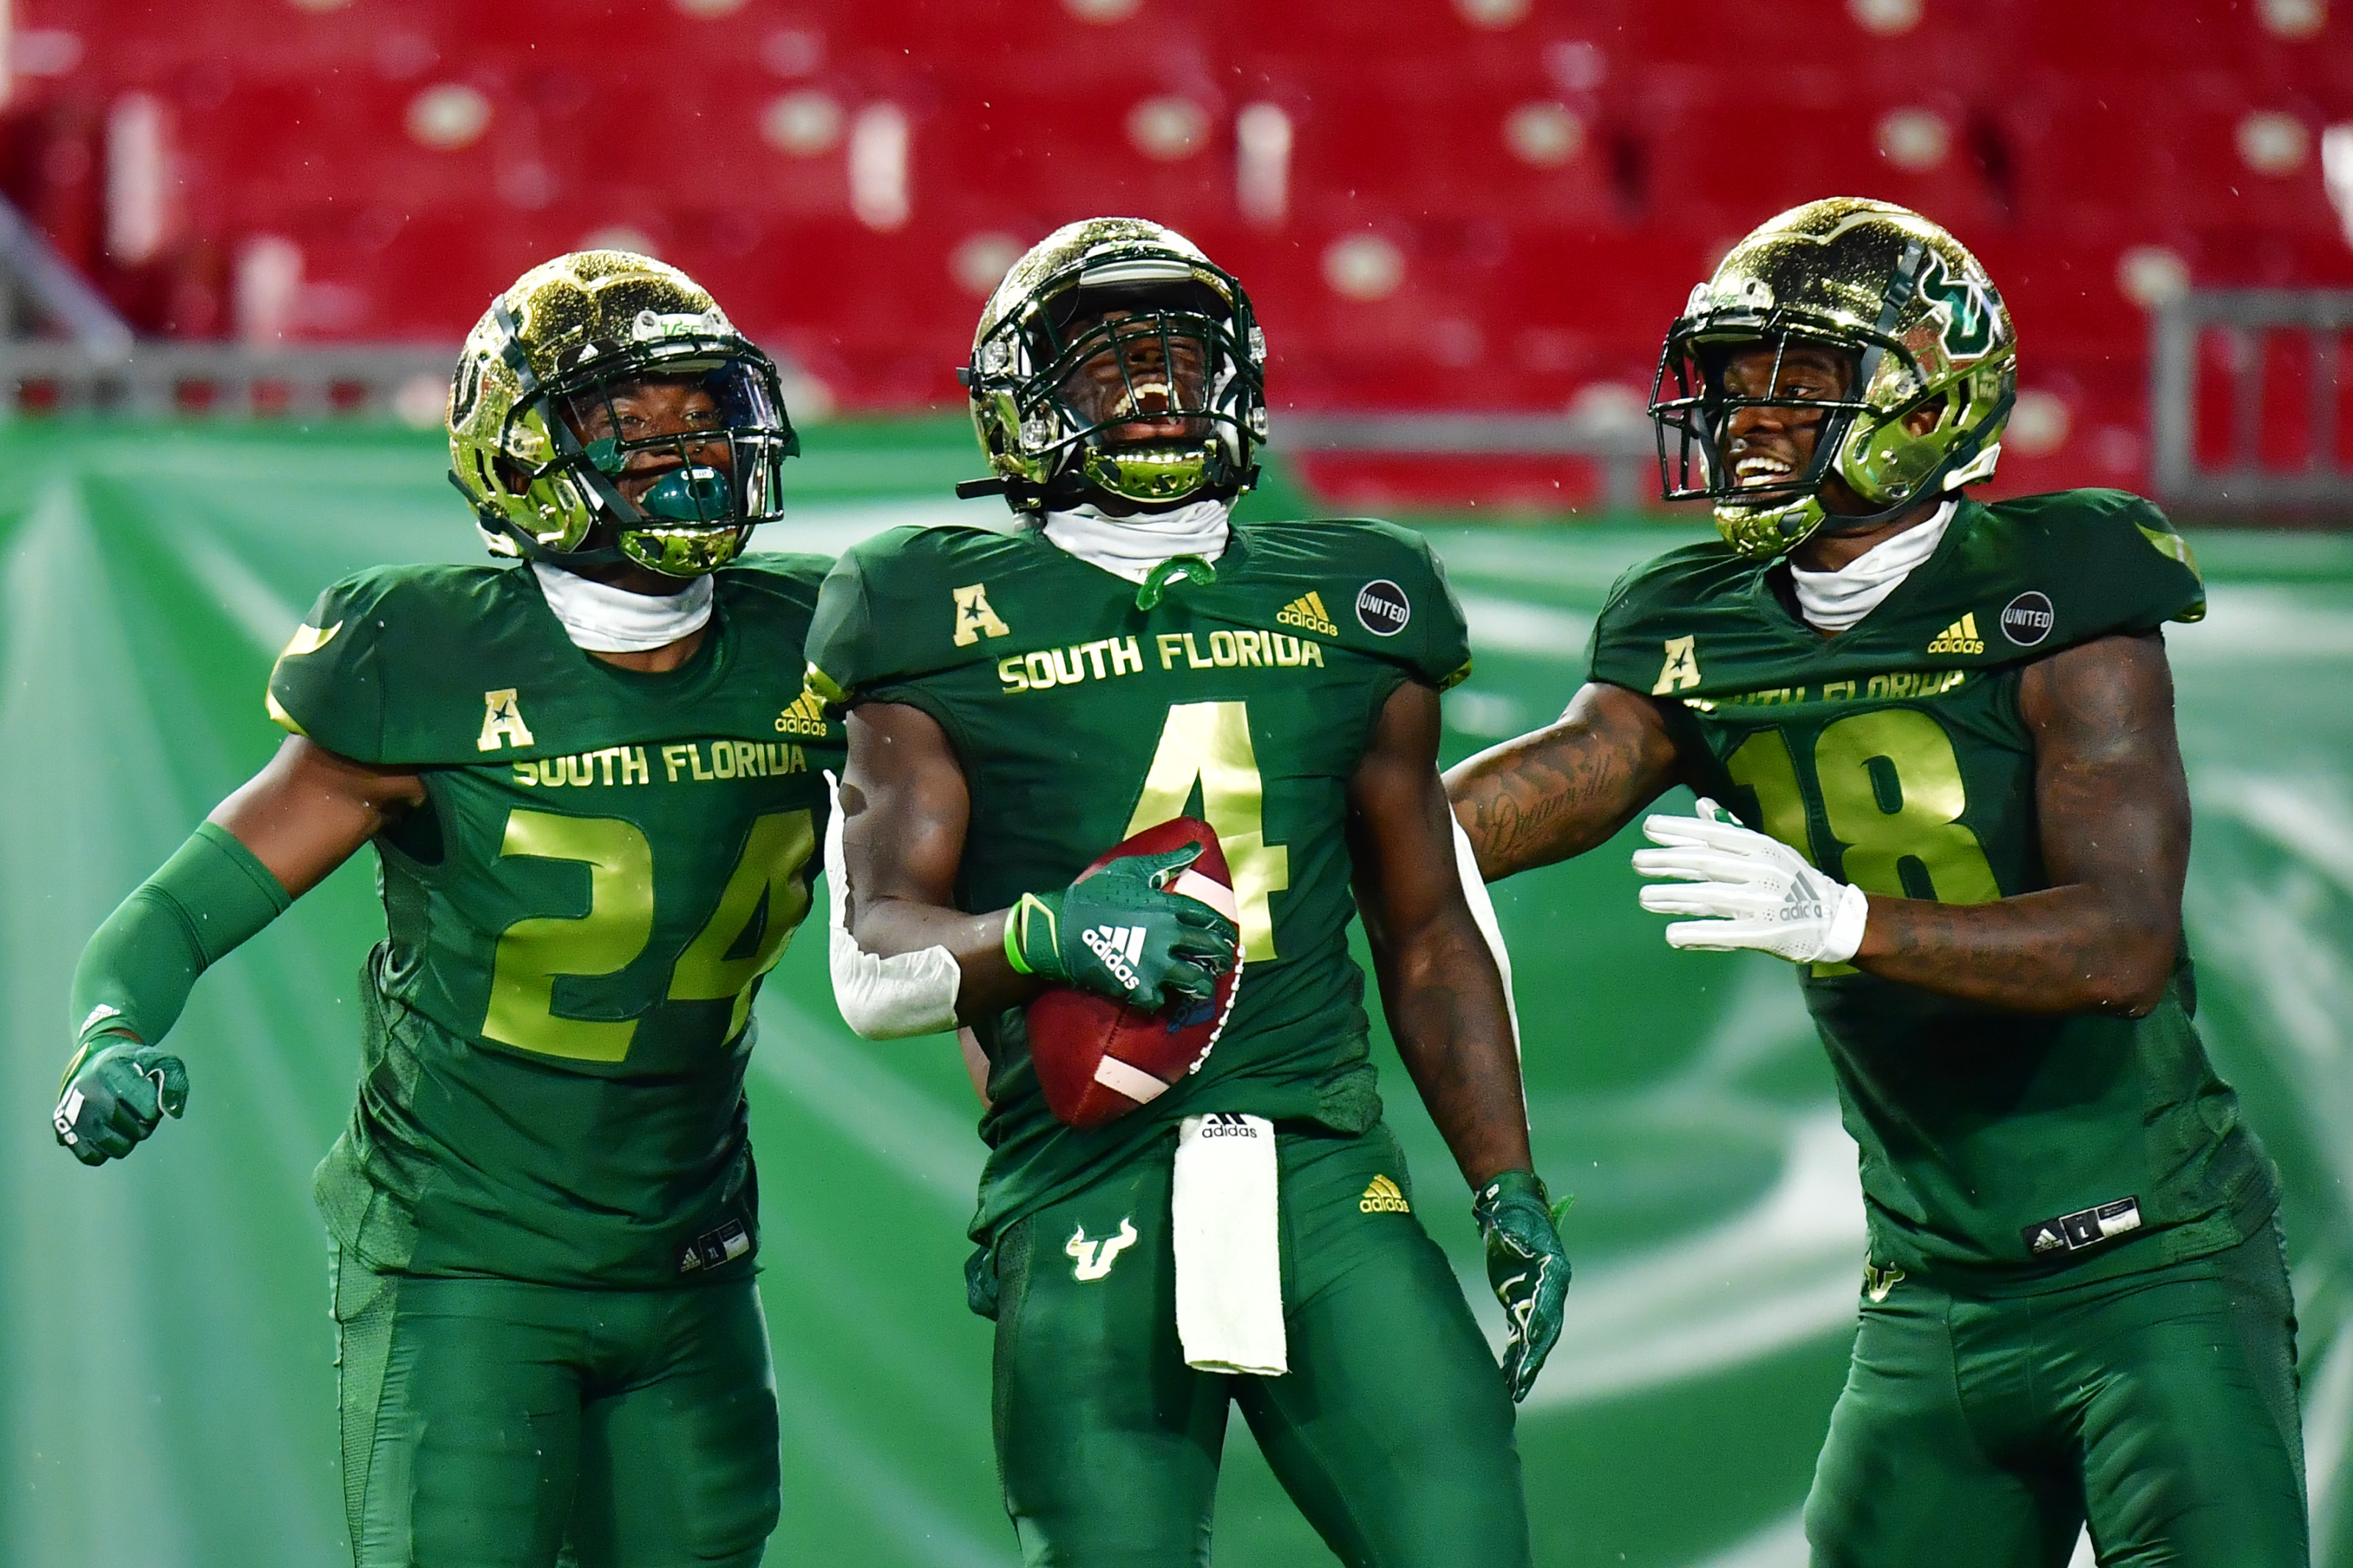 University of South Florida teams up with Adidas for new Bulls